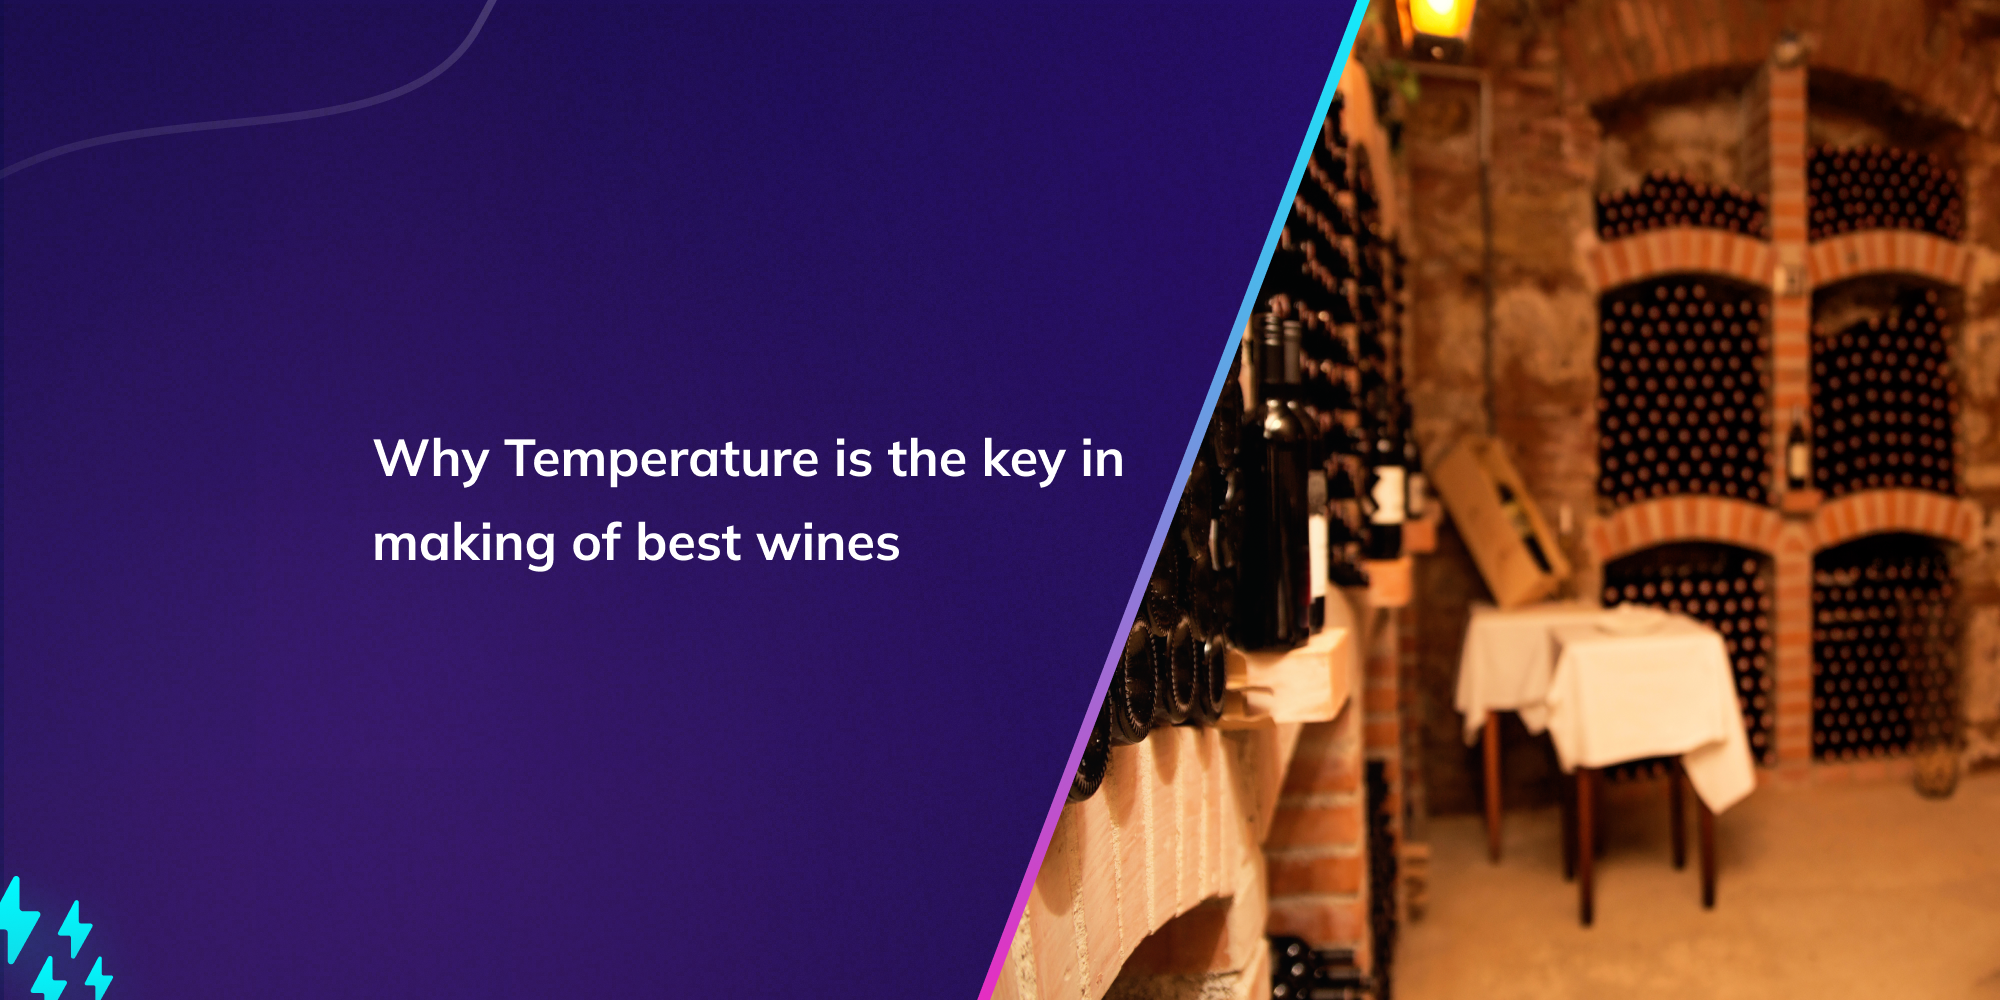 Why Temperature is the key in making of best wines